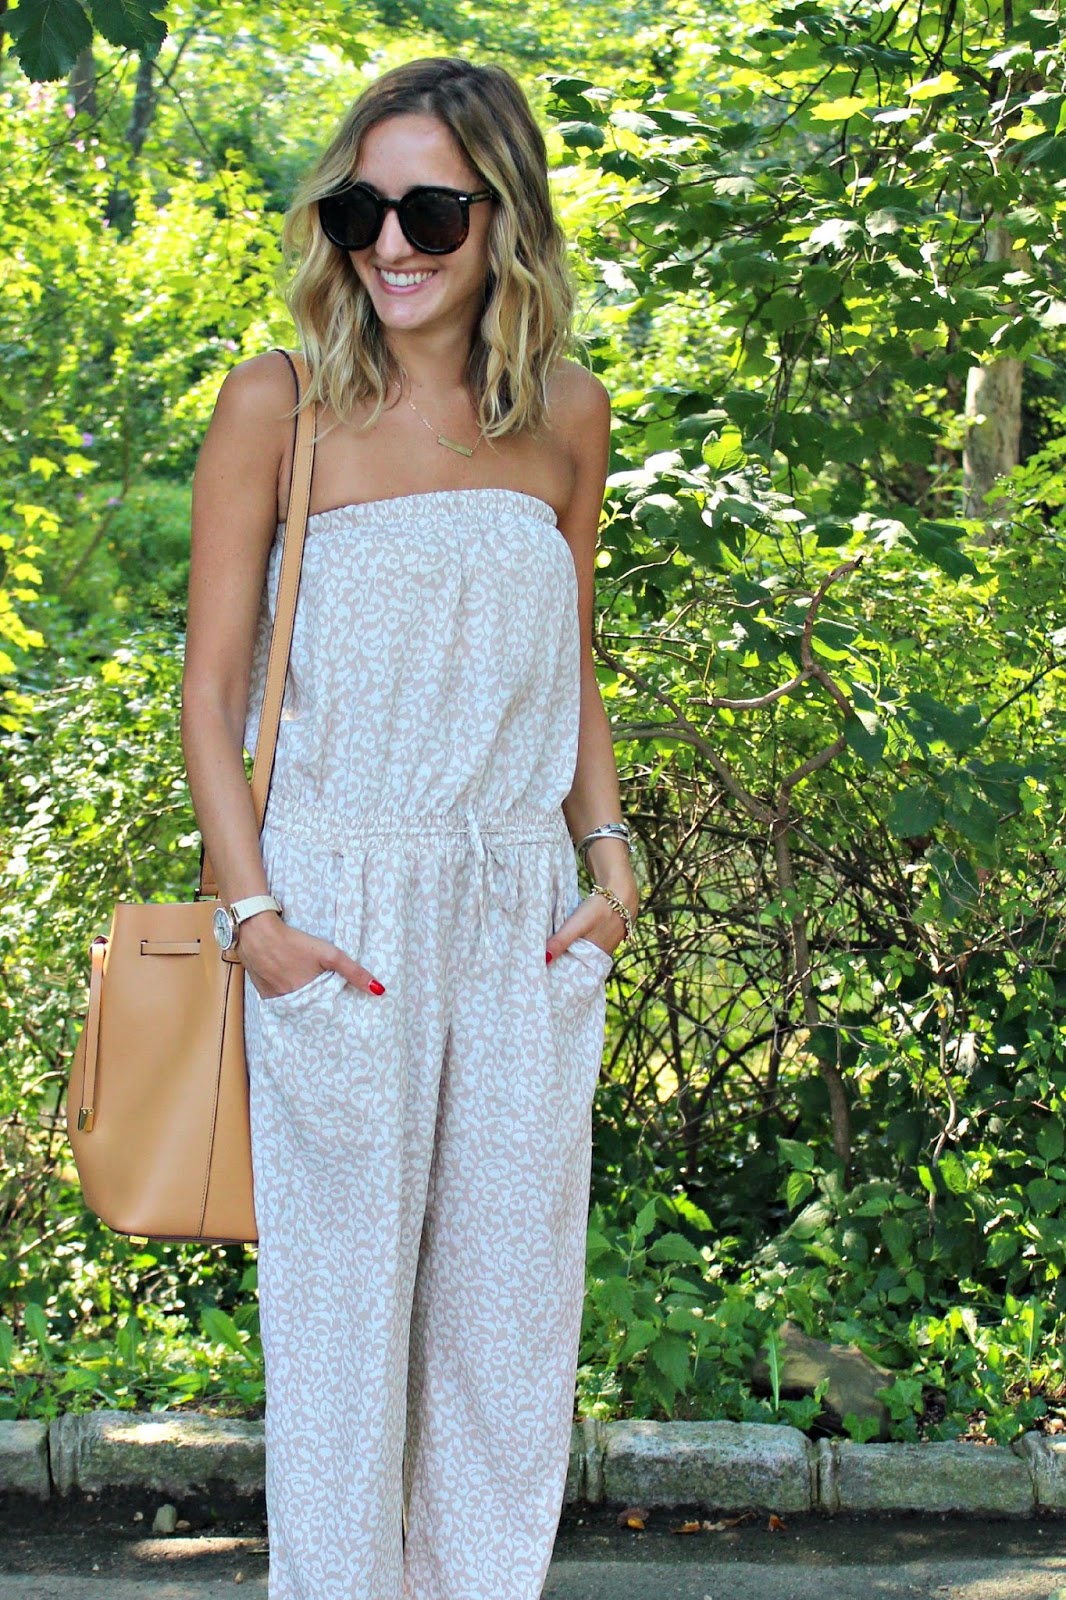 Michelle's Pa(i)ge | Fashion Blogger based in New York: LEOPARD JUMPSUIT